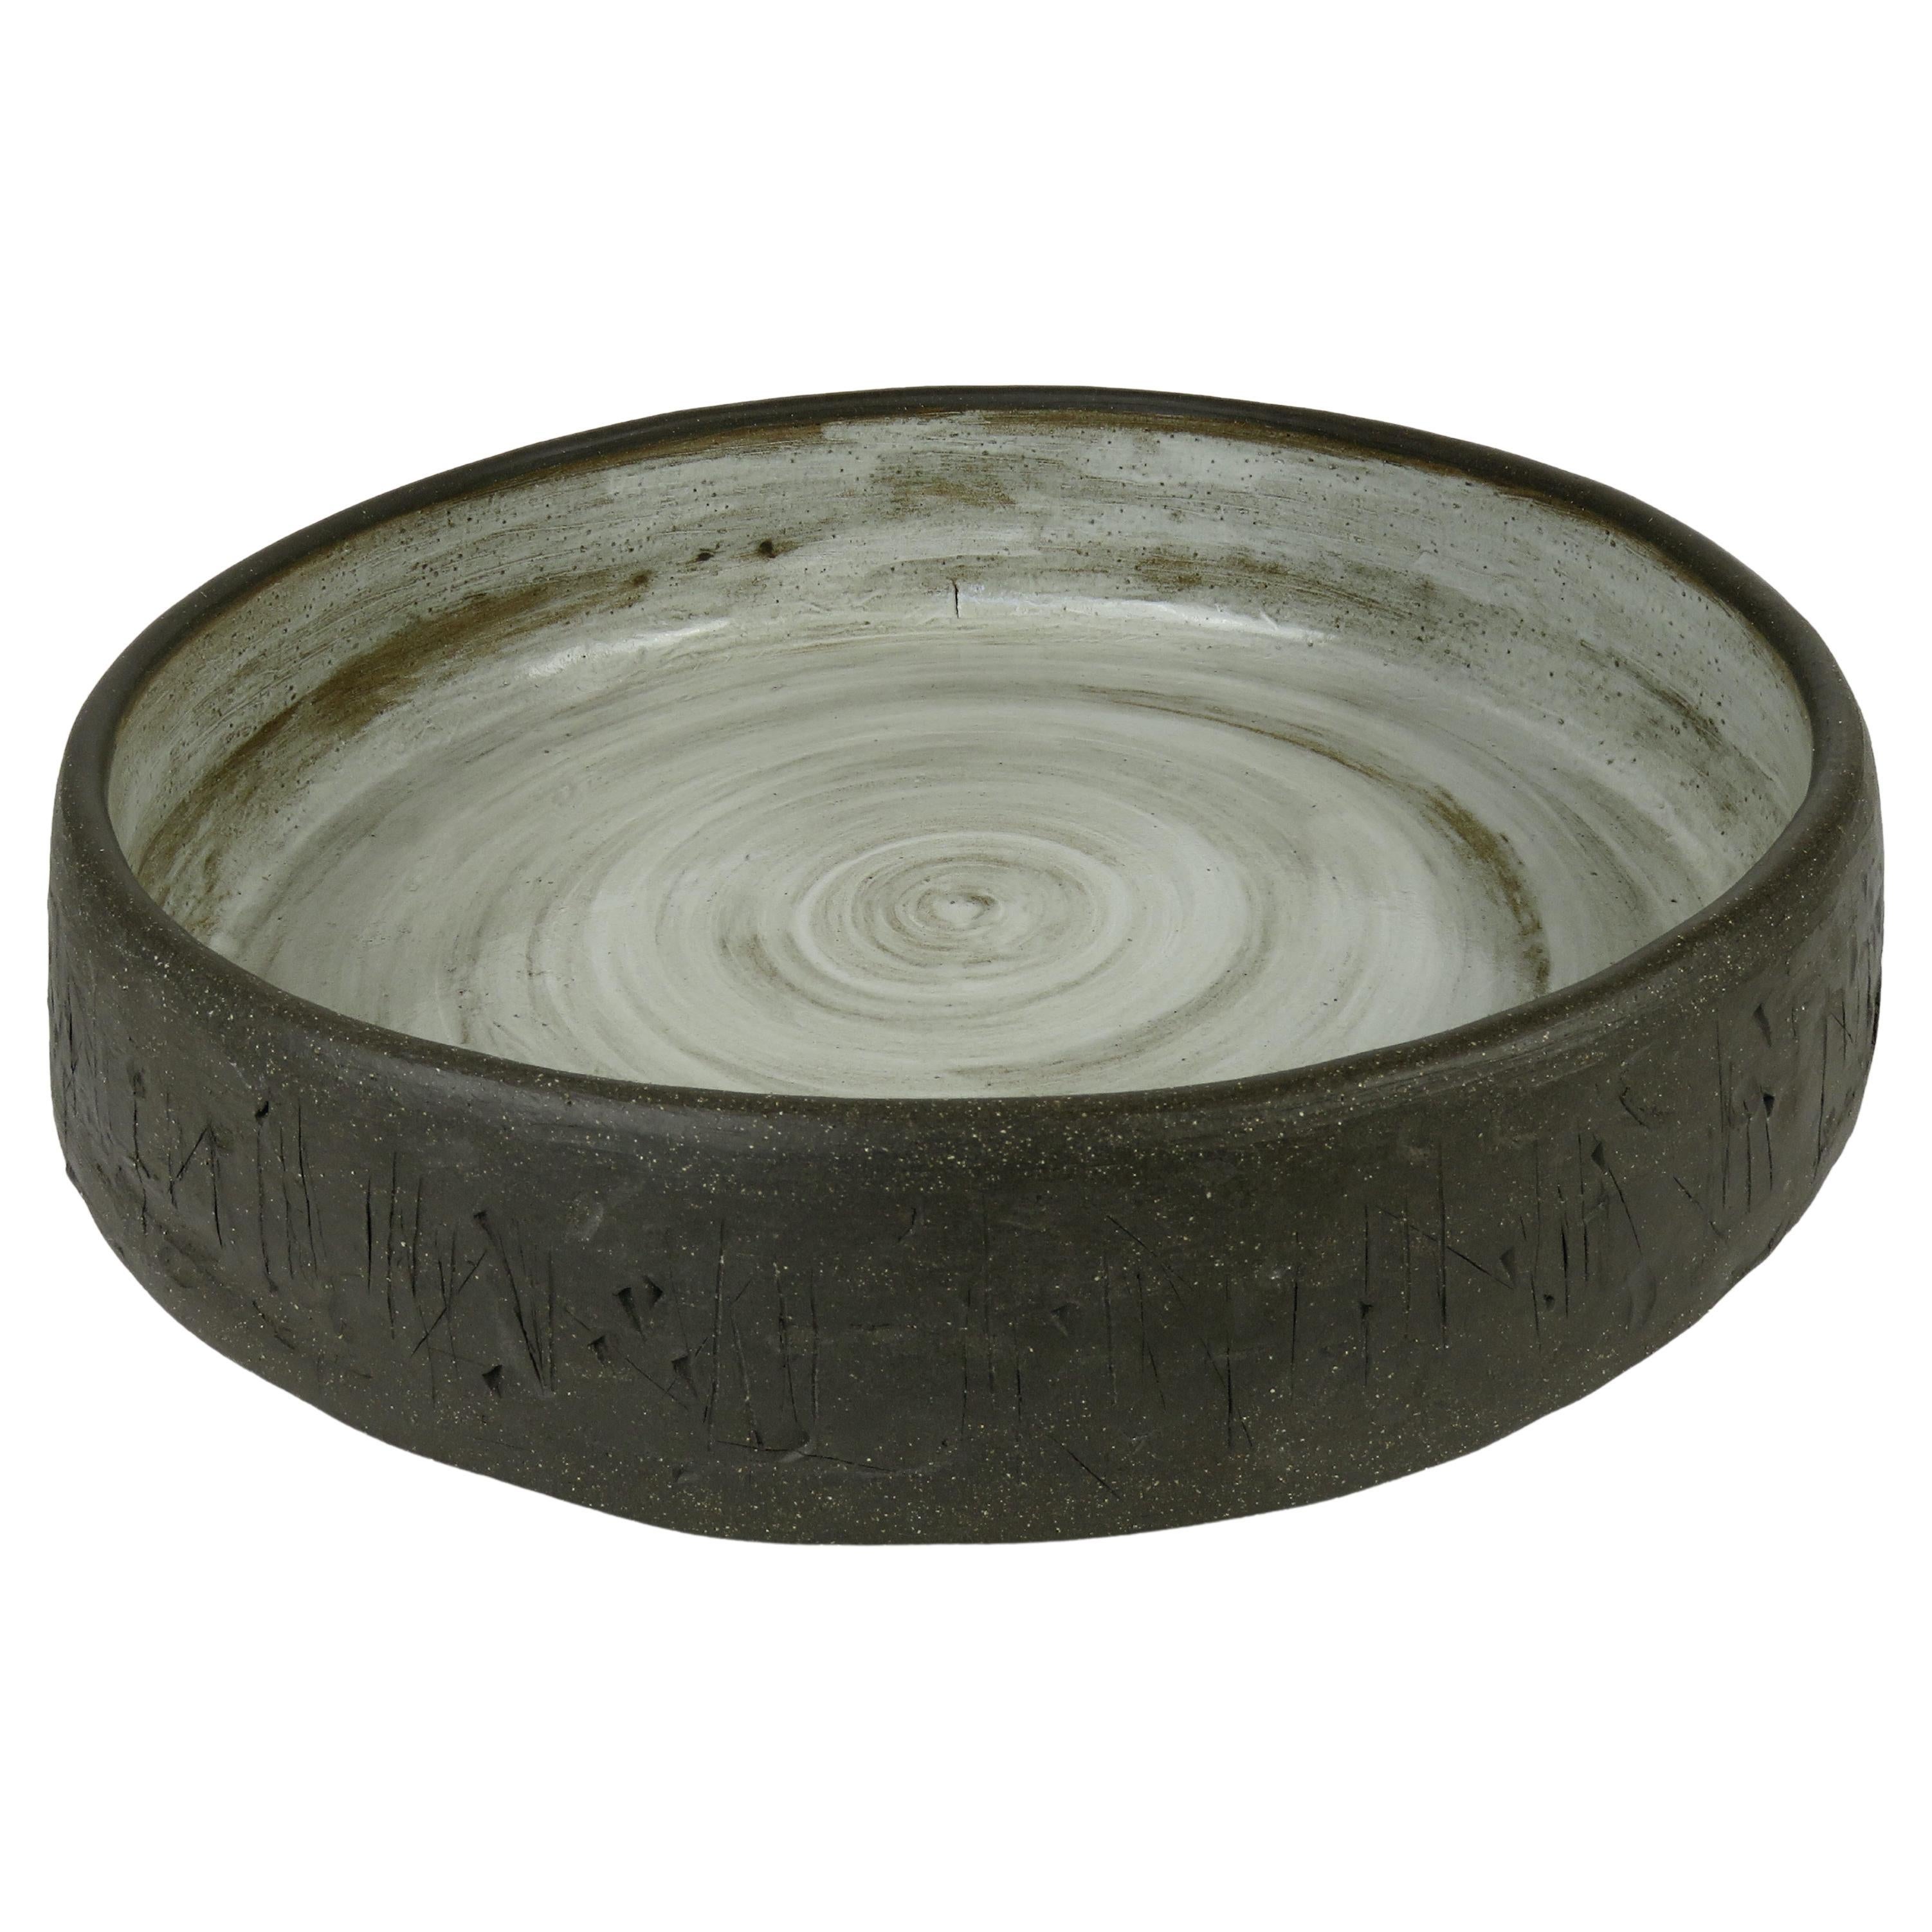 Clay Platters and Serveware